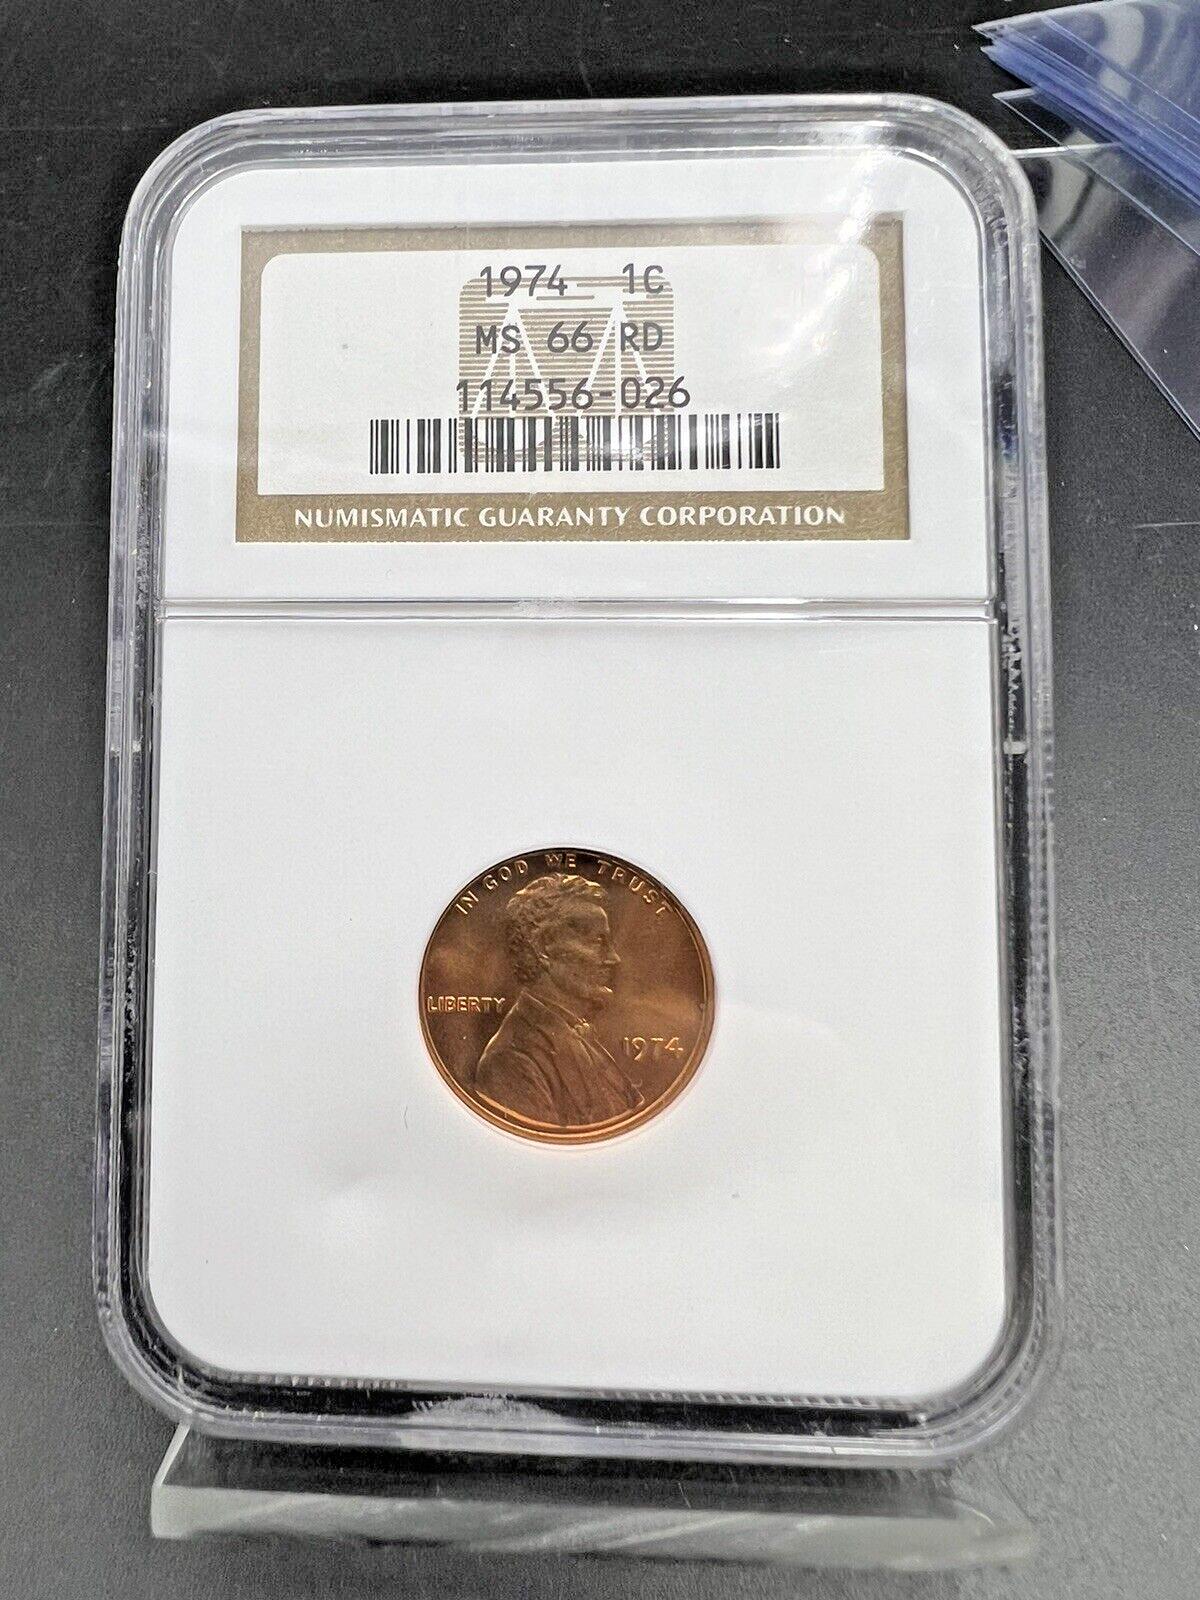 1974 P Lincoln Memorial Cent Penny Coin NGC MS66 RD Gem BU Certified